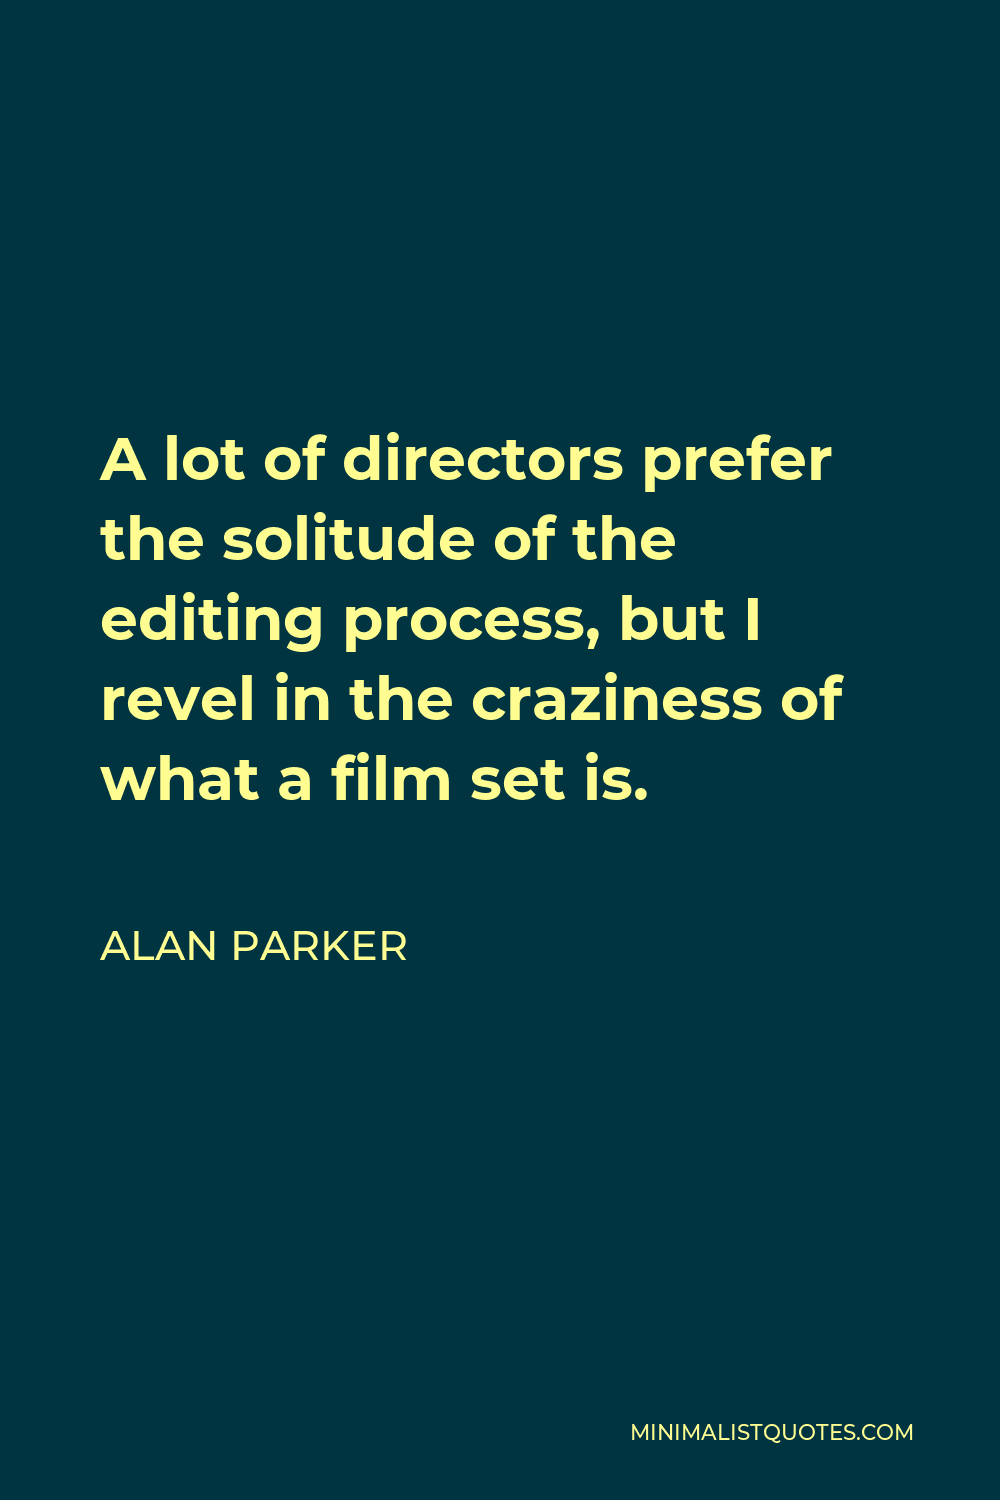 Alan Parker Quote - A lot of directors prefer the solitude of the editing process, but I revel in the craziness of what a film set is.